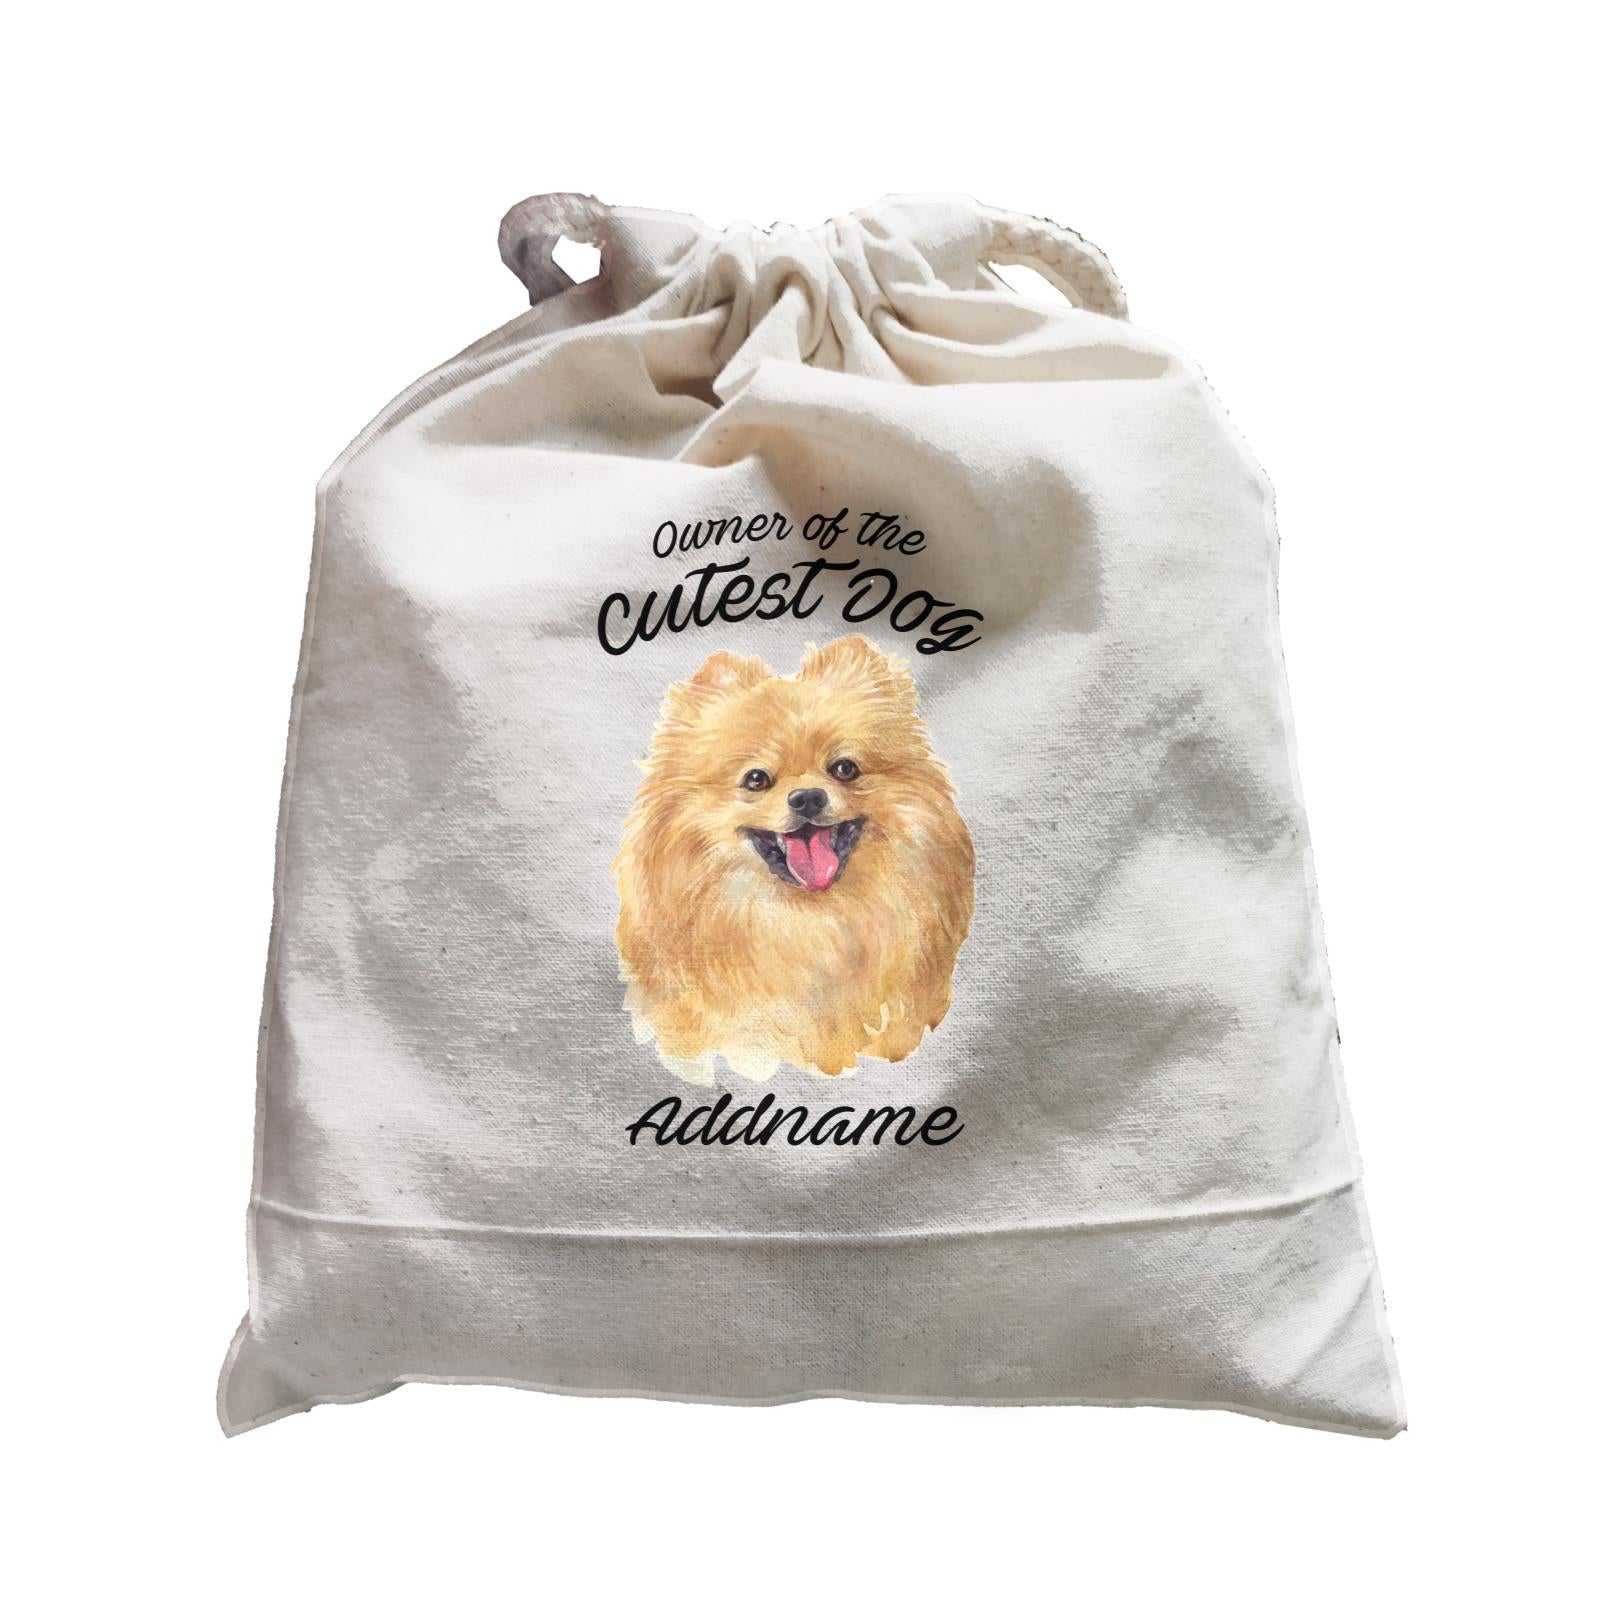 Watercolor Dog Owner Of The Cutest Dog Pomeranian Addname Satchel